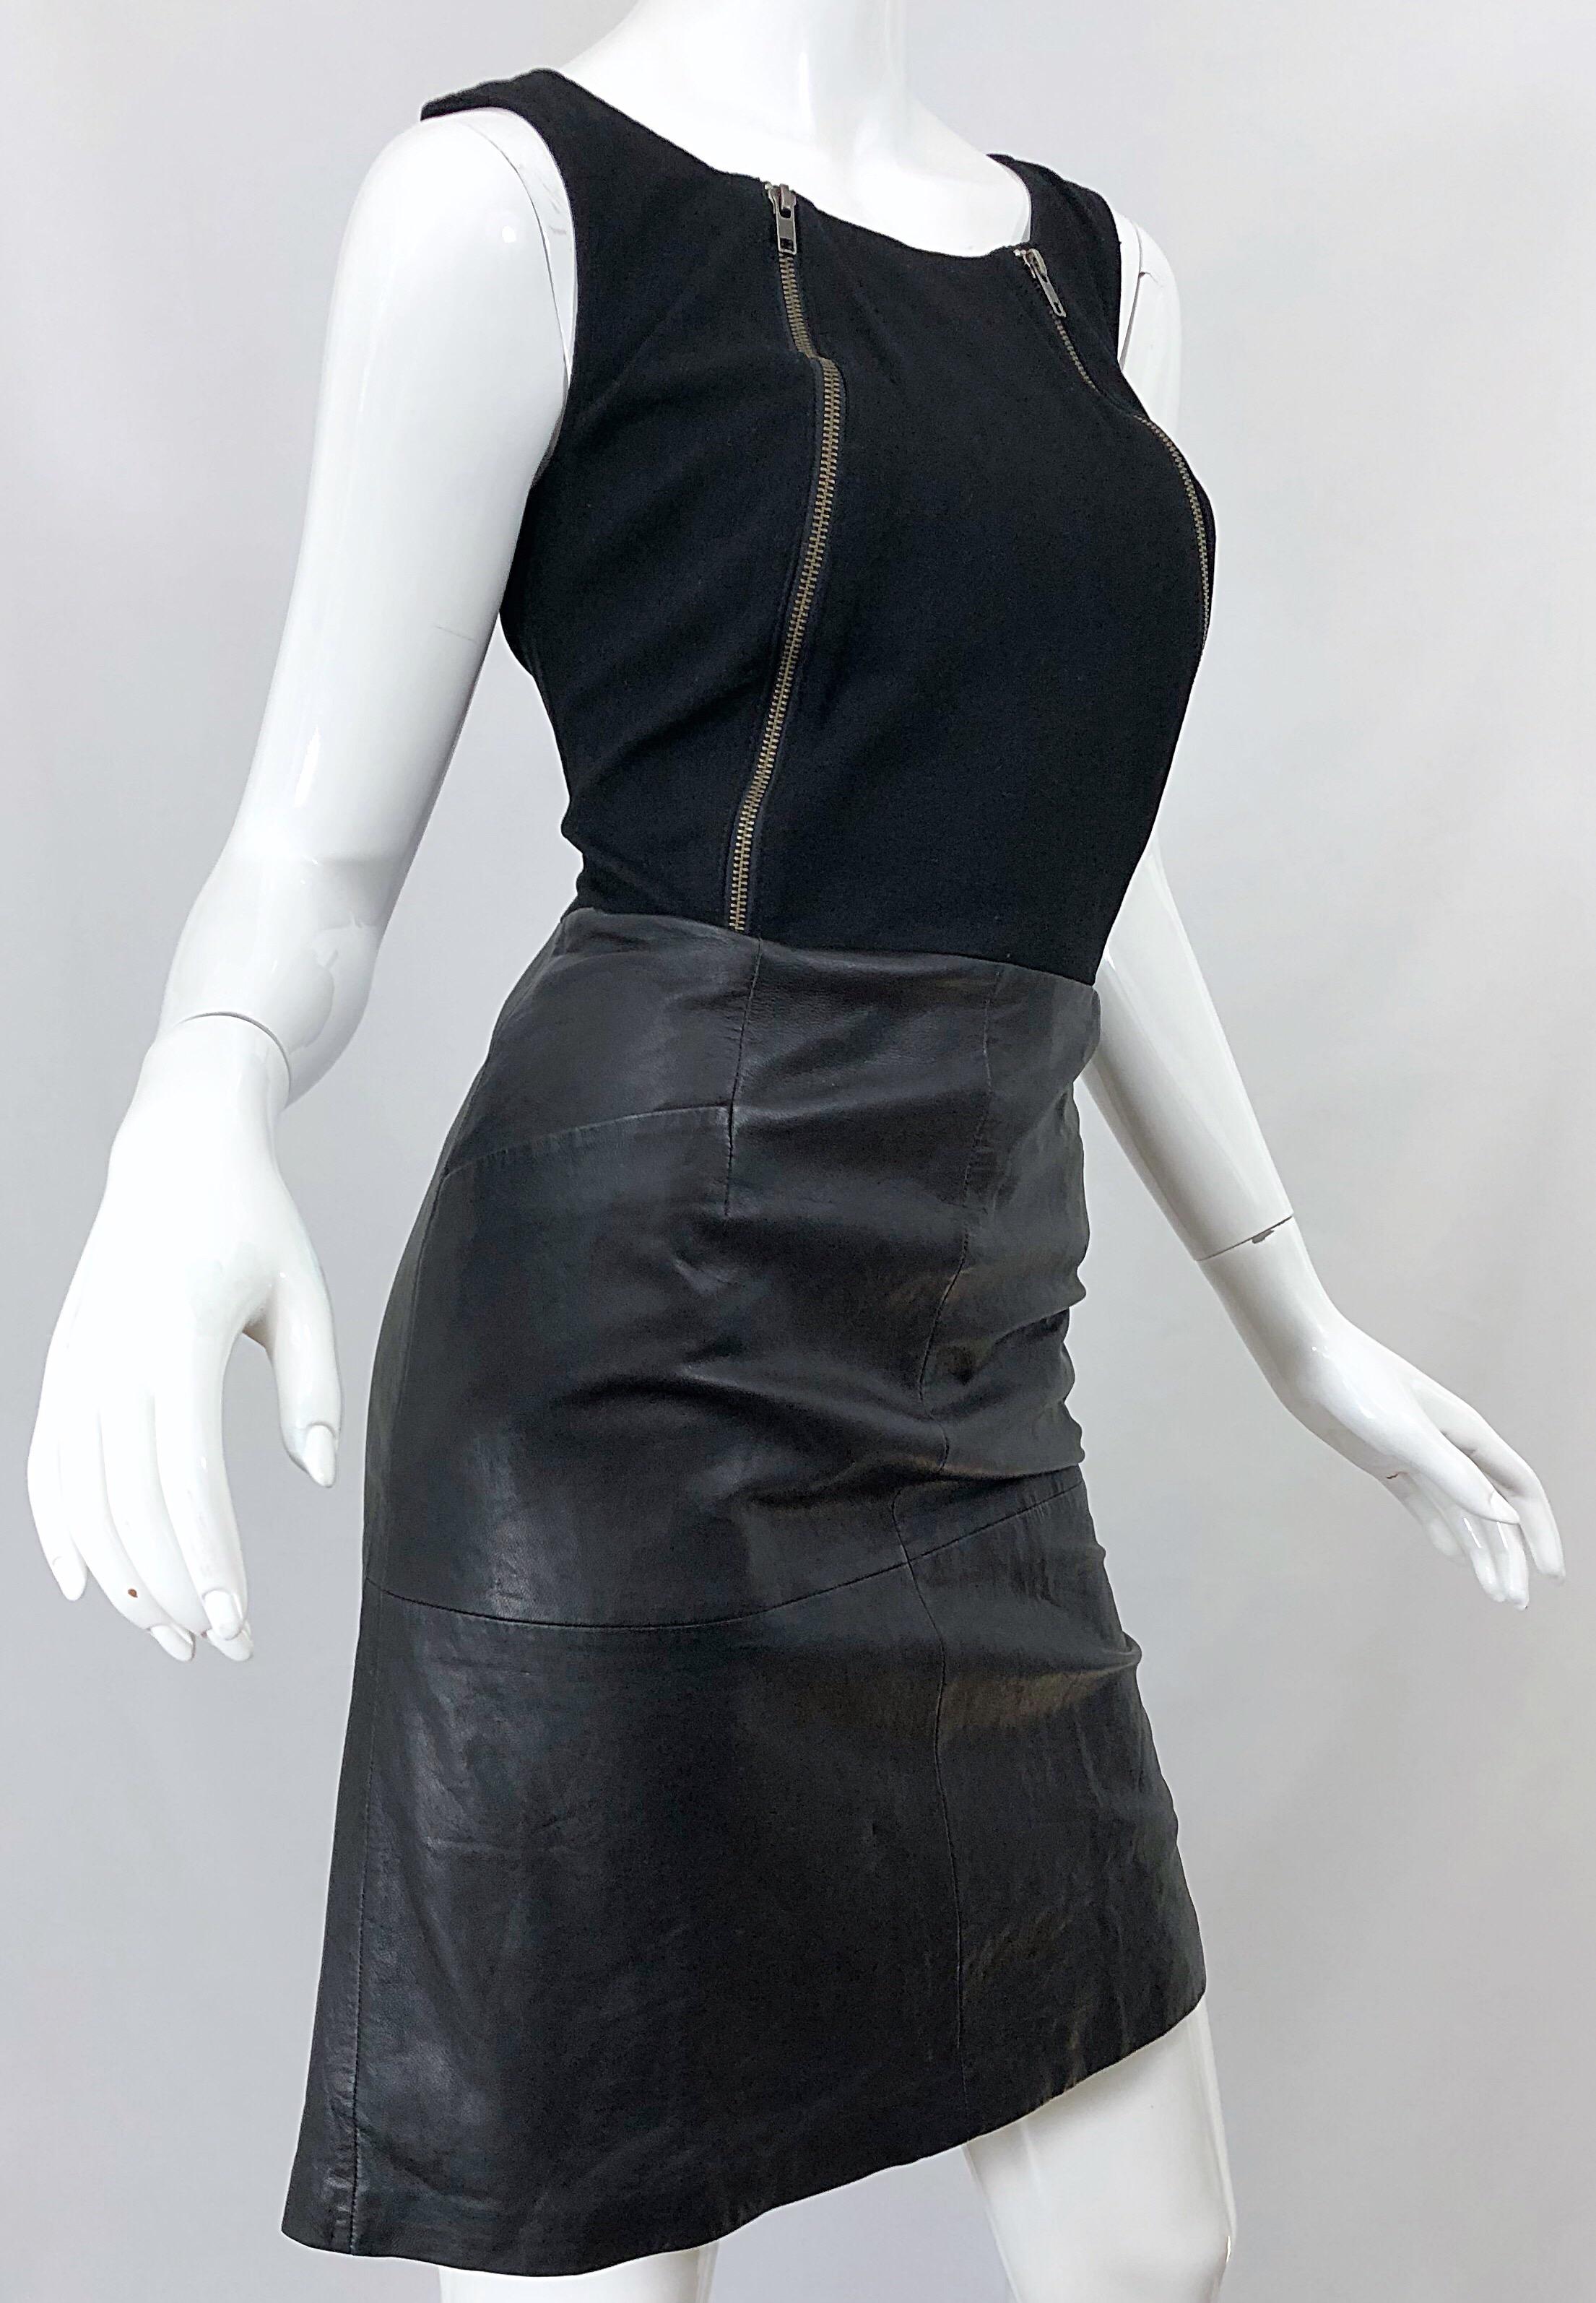 NWT 1990s Jean Louis Scherrer Black Leather + Jersey Bodycon Vintage 90s Dress In New Condition For Sale In San Diego, CA